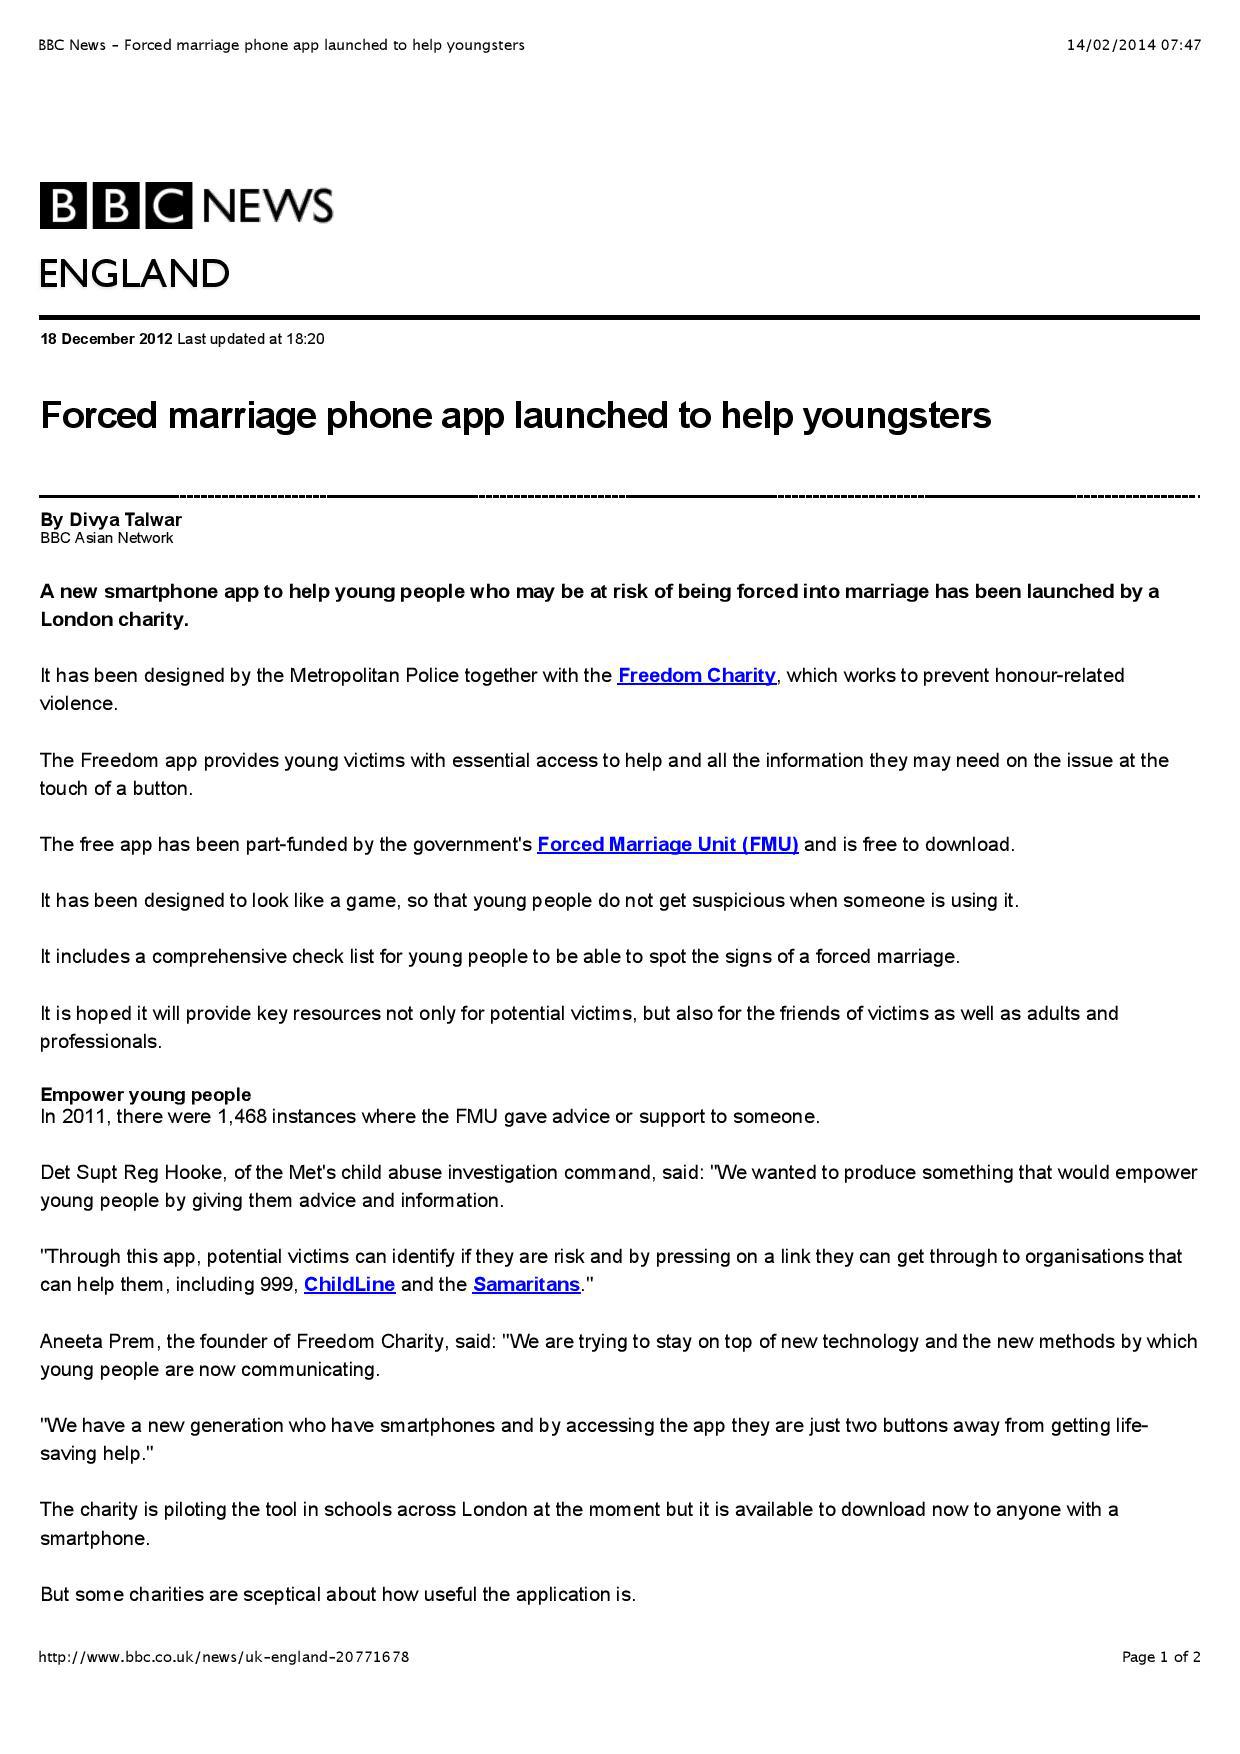 bbc-news-forced-marriage-phone-app-launched-to-help-youngsters-page-001